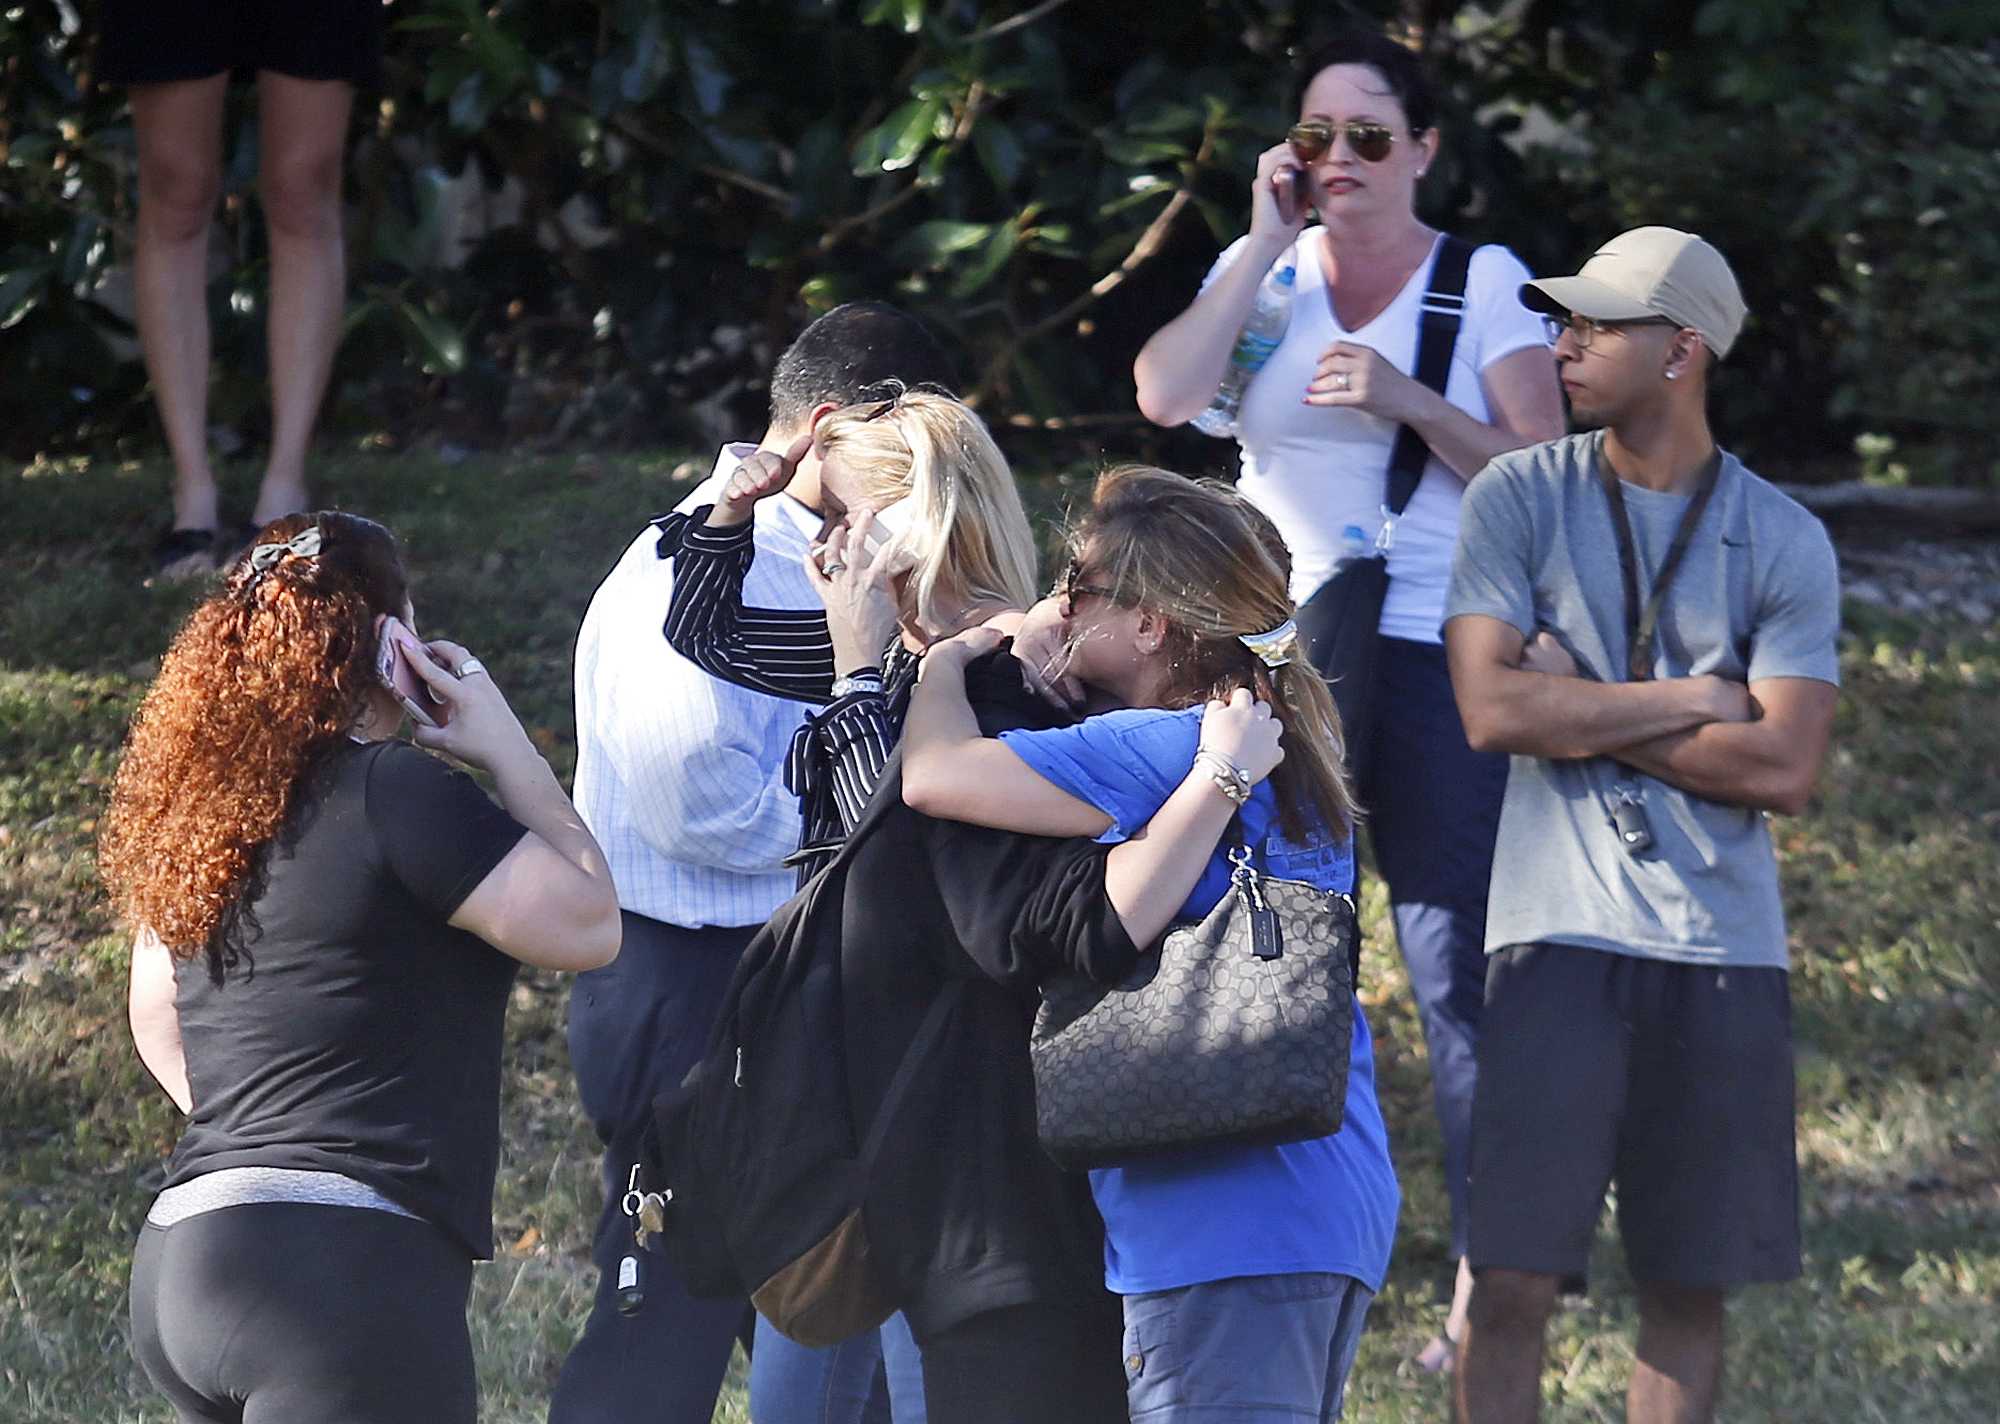 GoFundMe page for Florida shooting victims raises more than $100K in one day